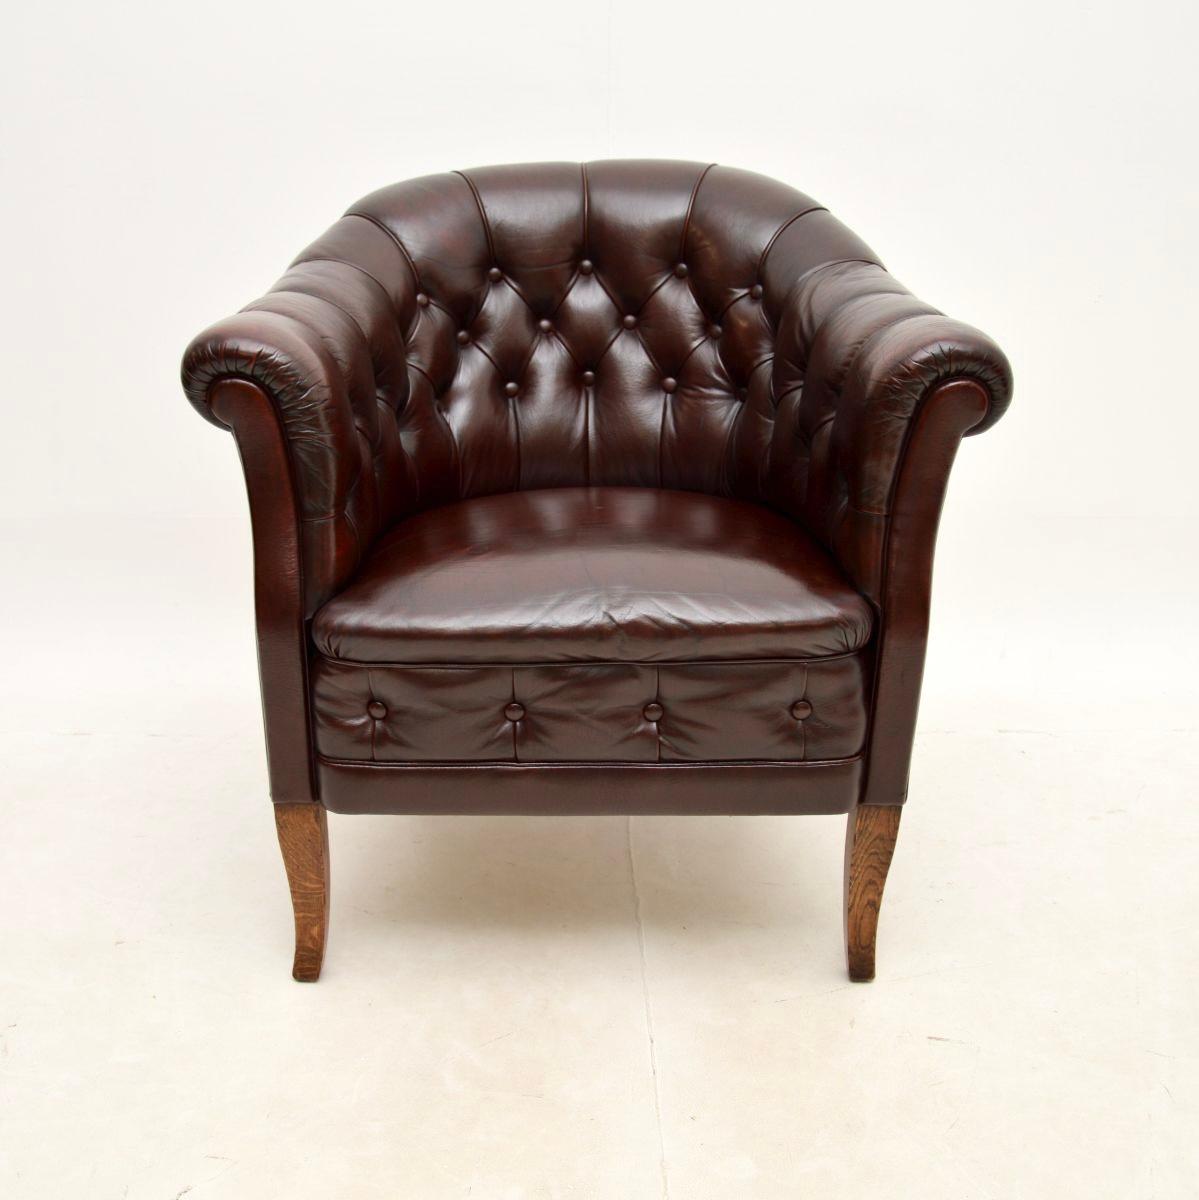 An absolutely beautiful antique Swedish leather armchair. We have recently imported this from Sweden, it dates from around the 1900-1920 period.

The quality is superb and it is very comfortable. The seat is well sprung, the frame sits on solid oak